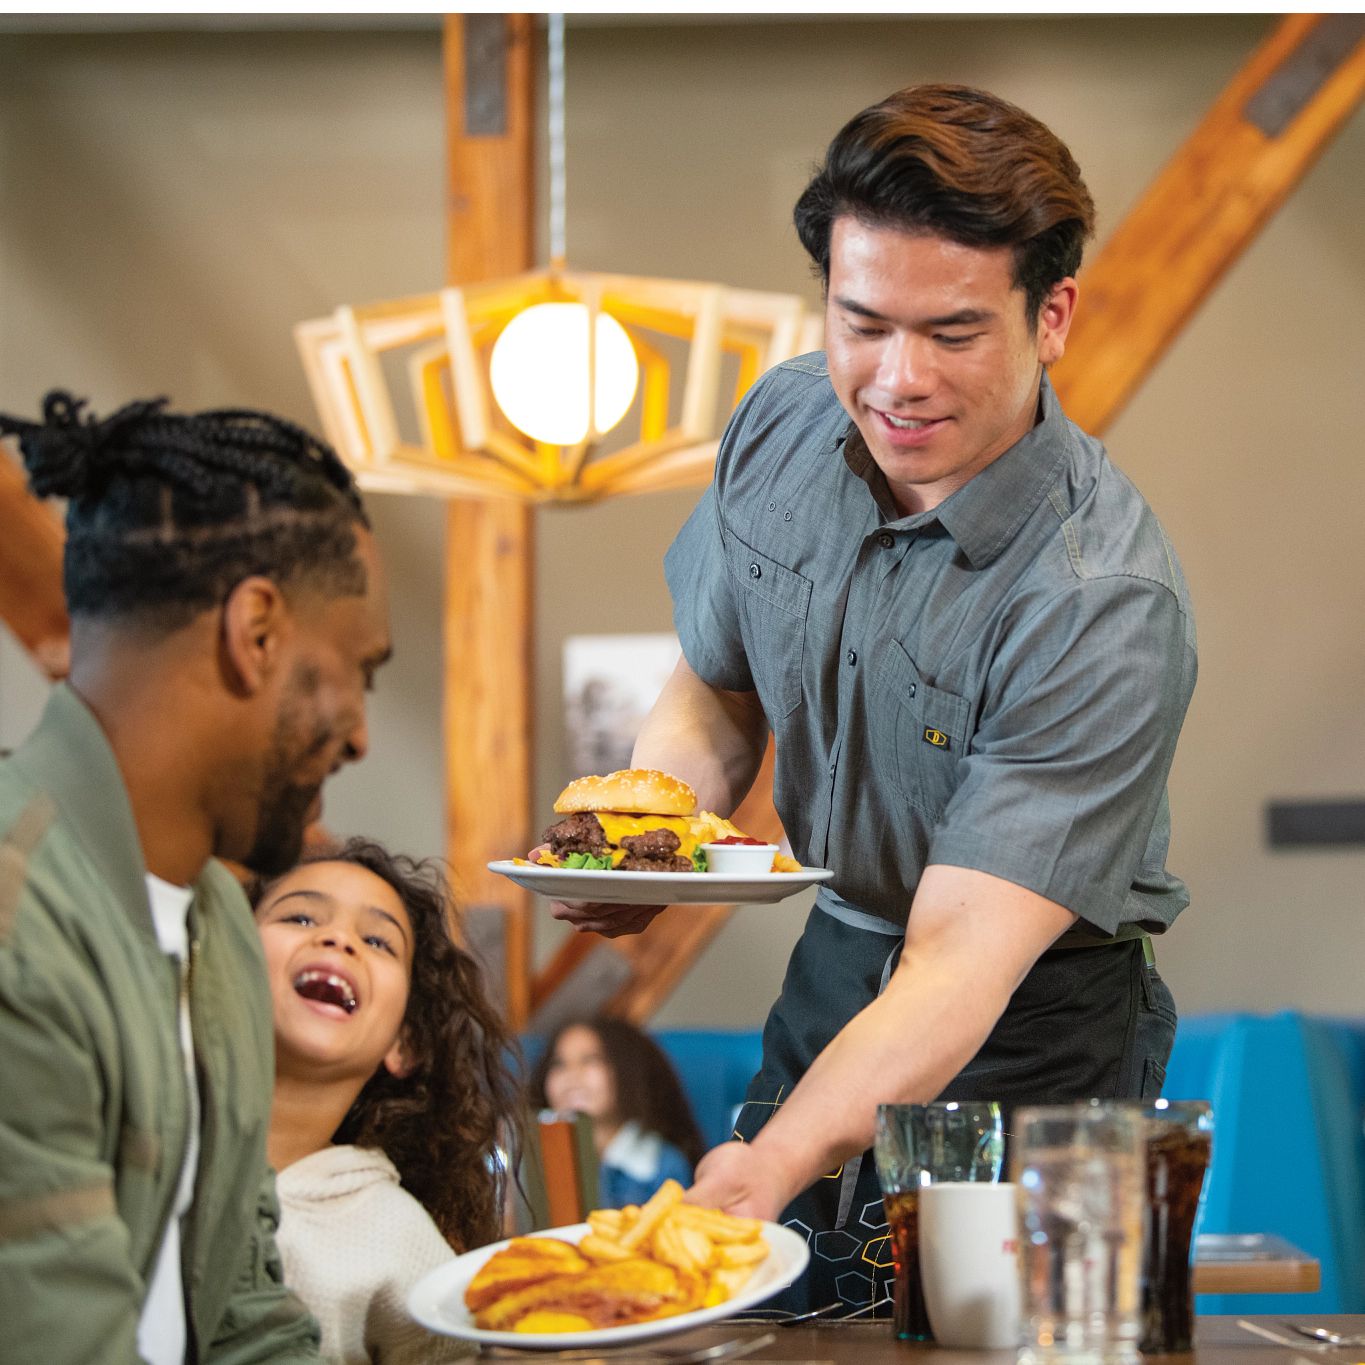 Male server placing food on a table with a father and child